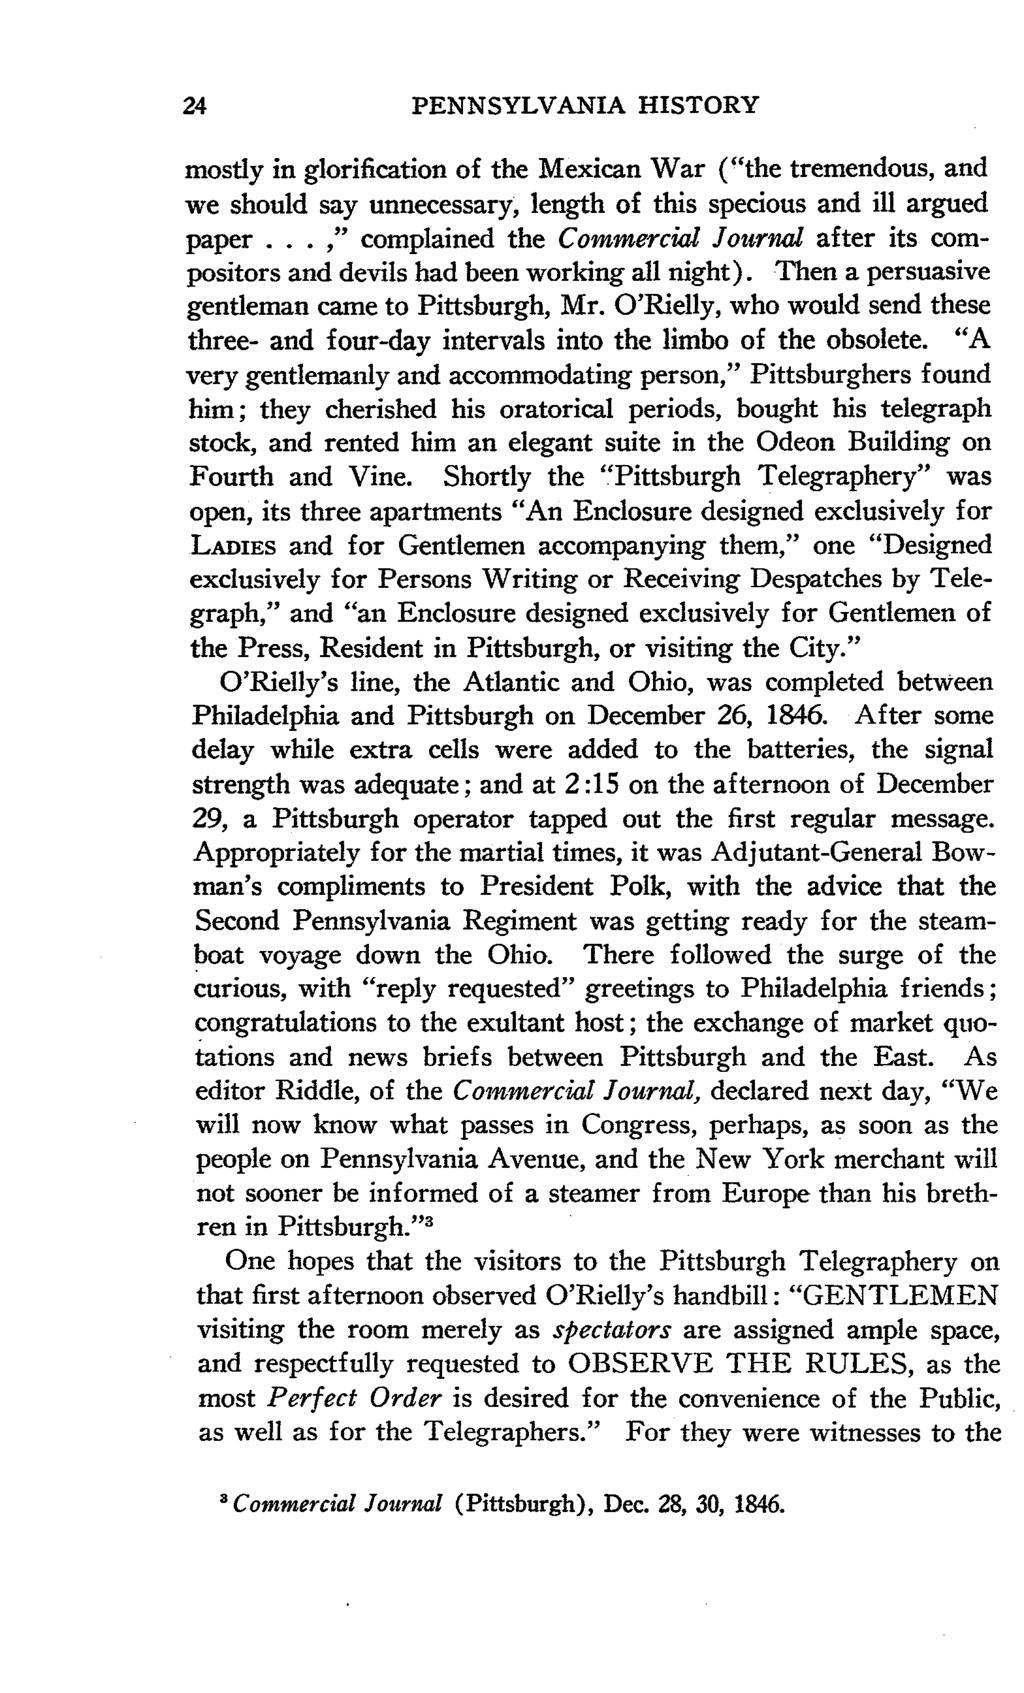 24 PENNSYLVANIA HISTORY mostly in glorification of the Mexican War ("the tremendous, and we should say unnecessary, length of this specious and ill argued paper.